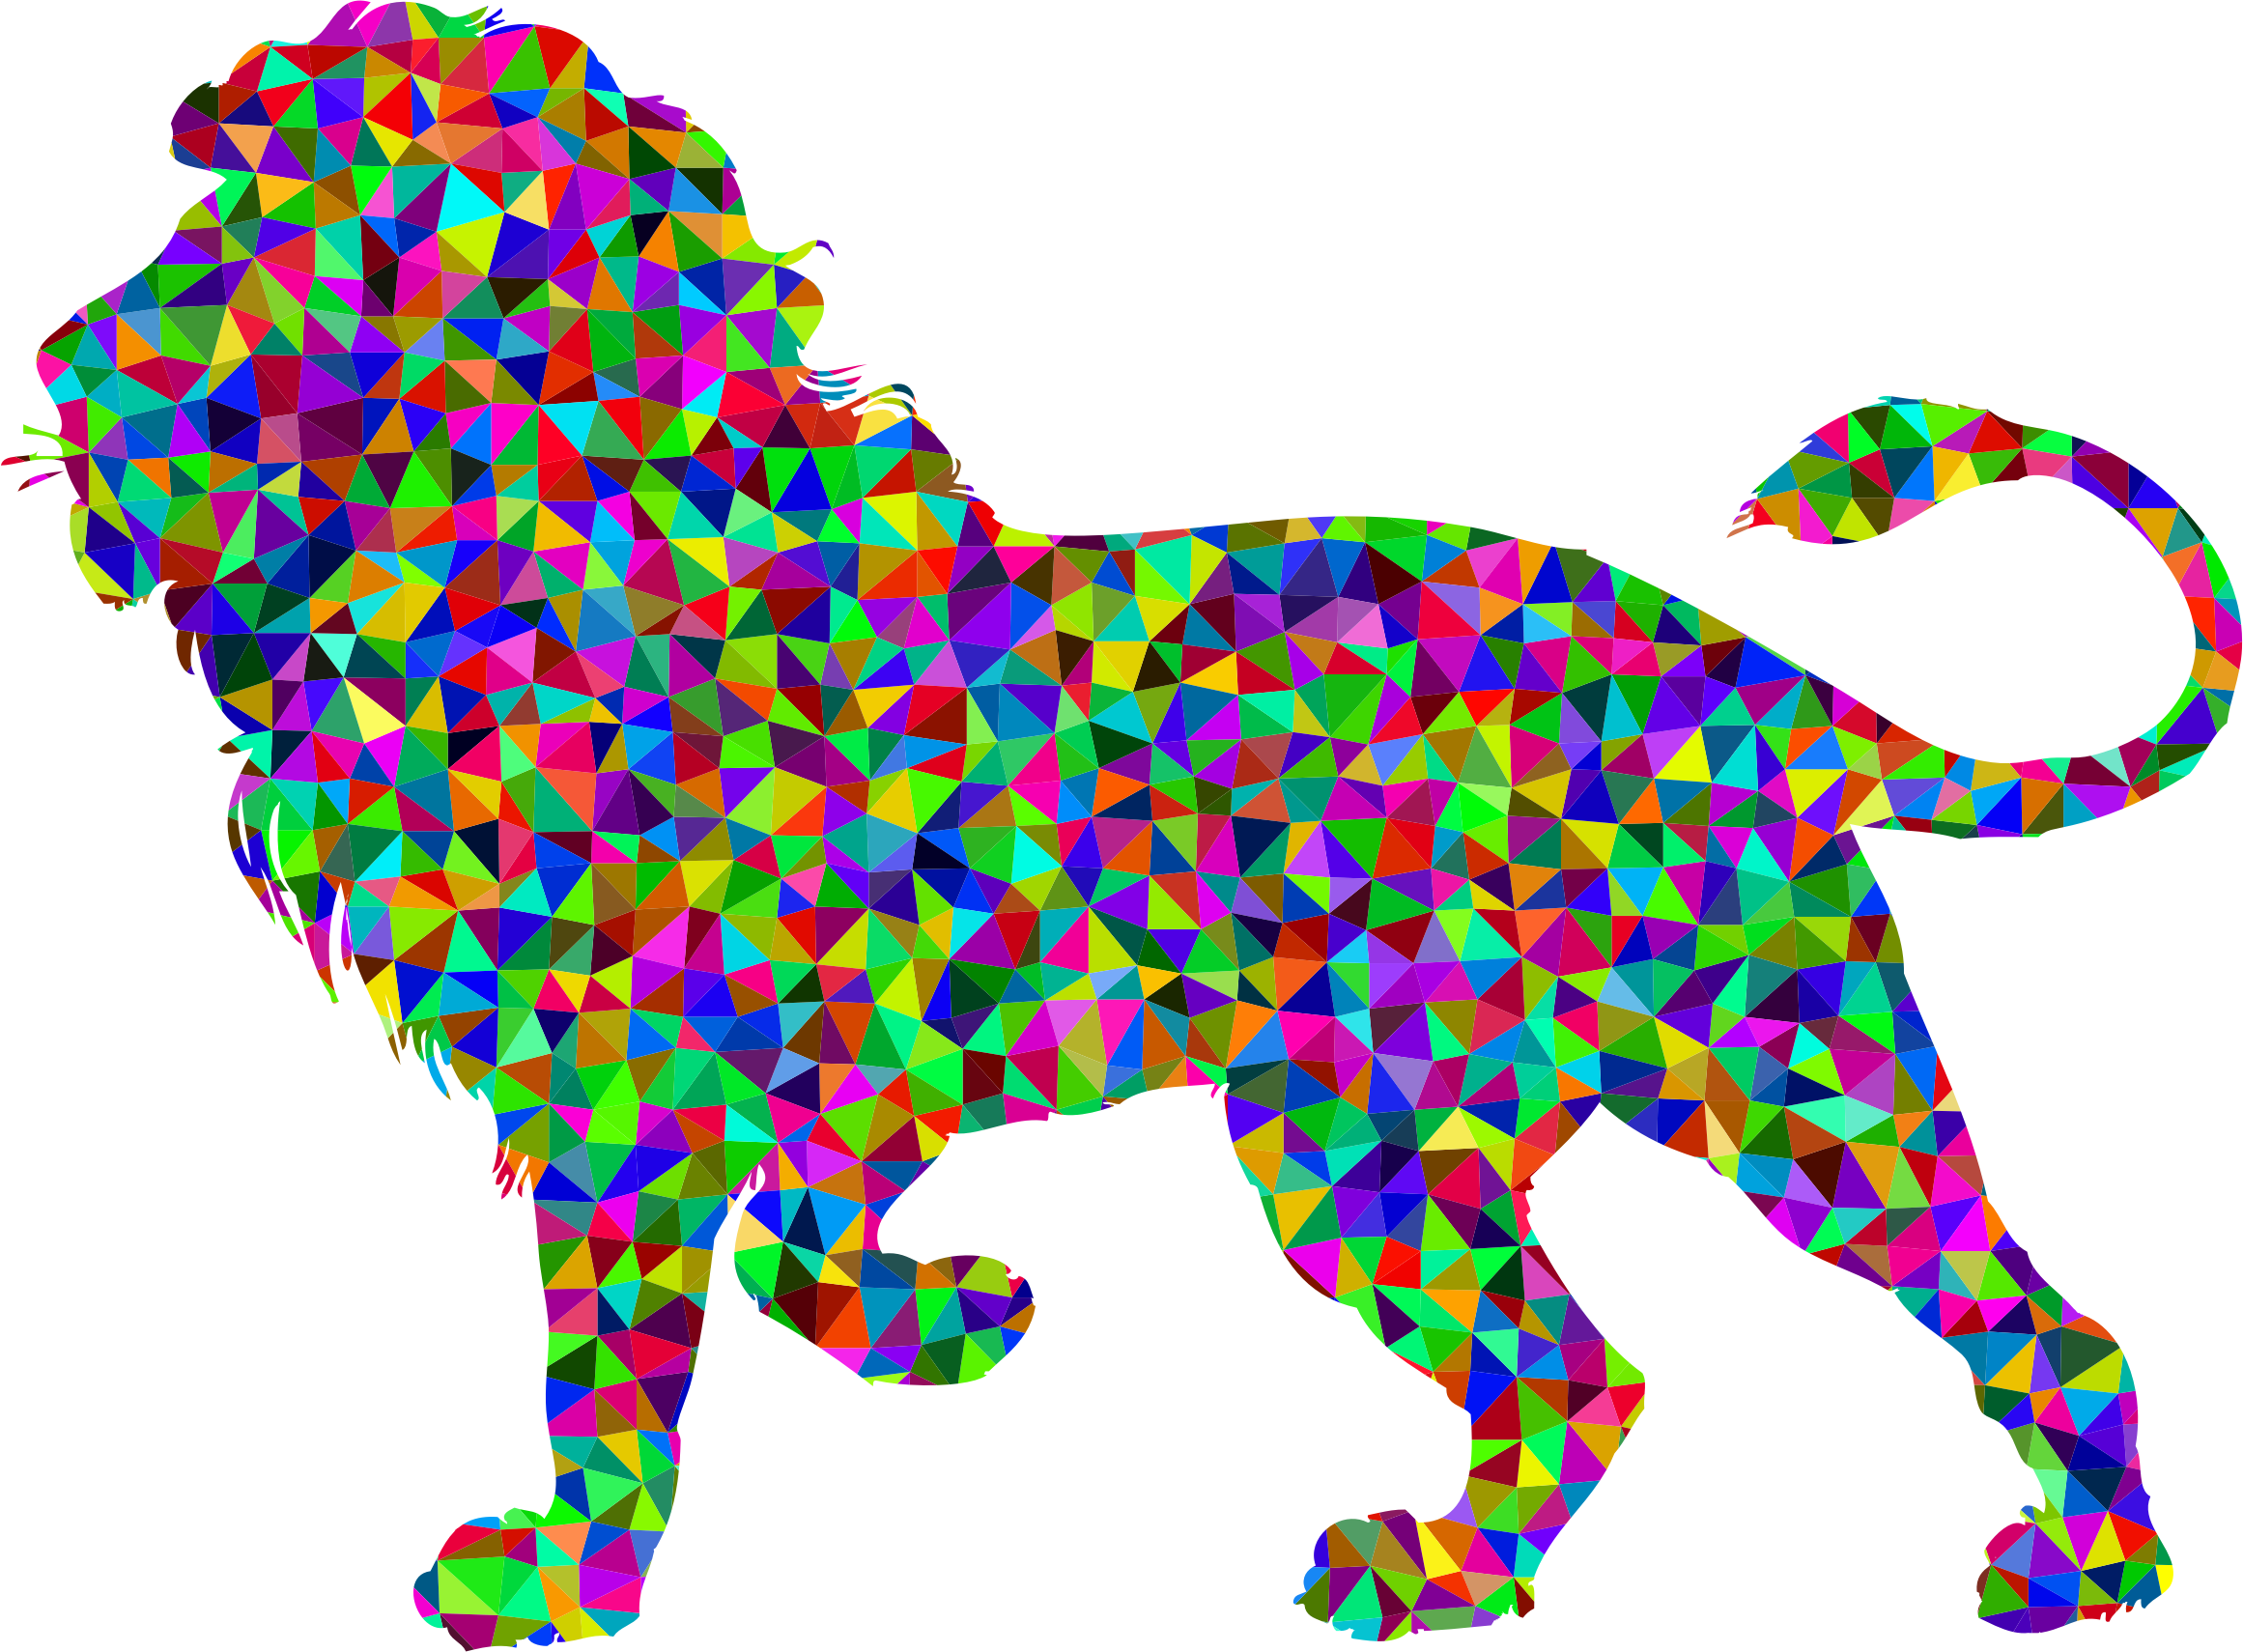 clipart lion abstract